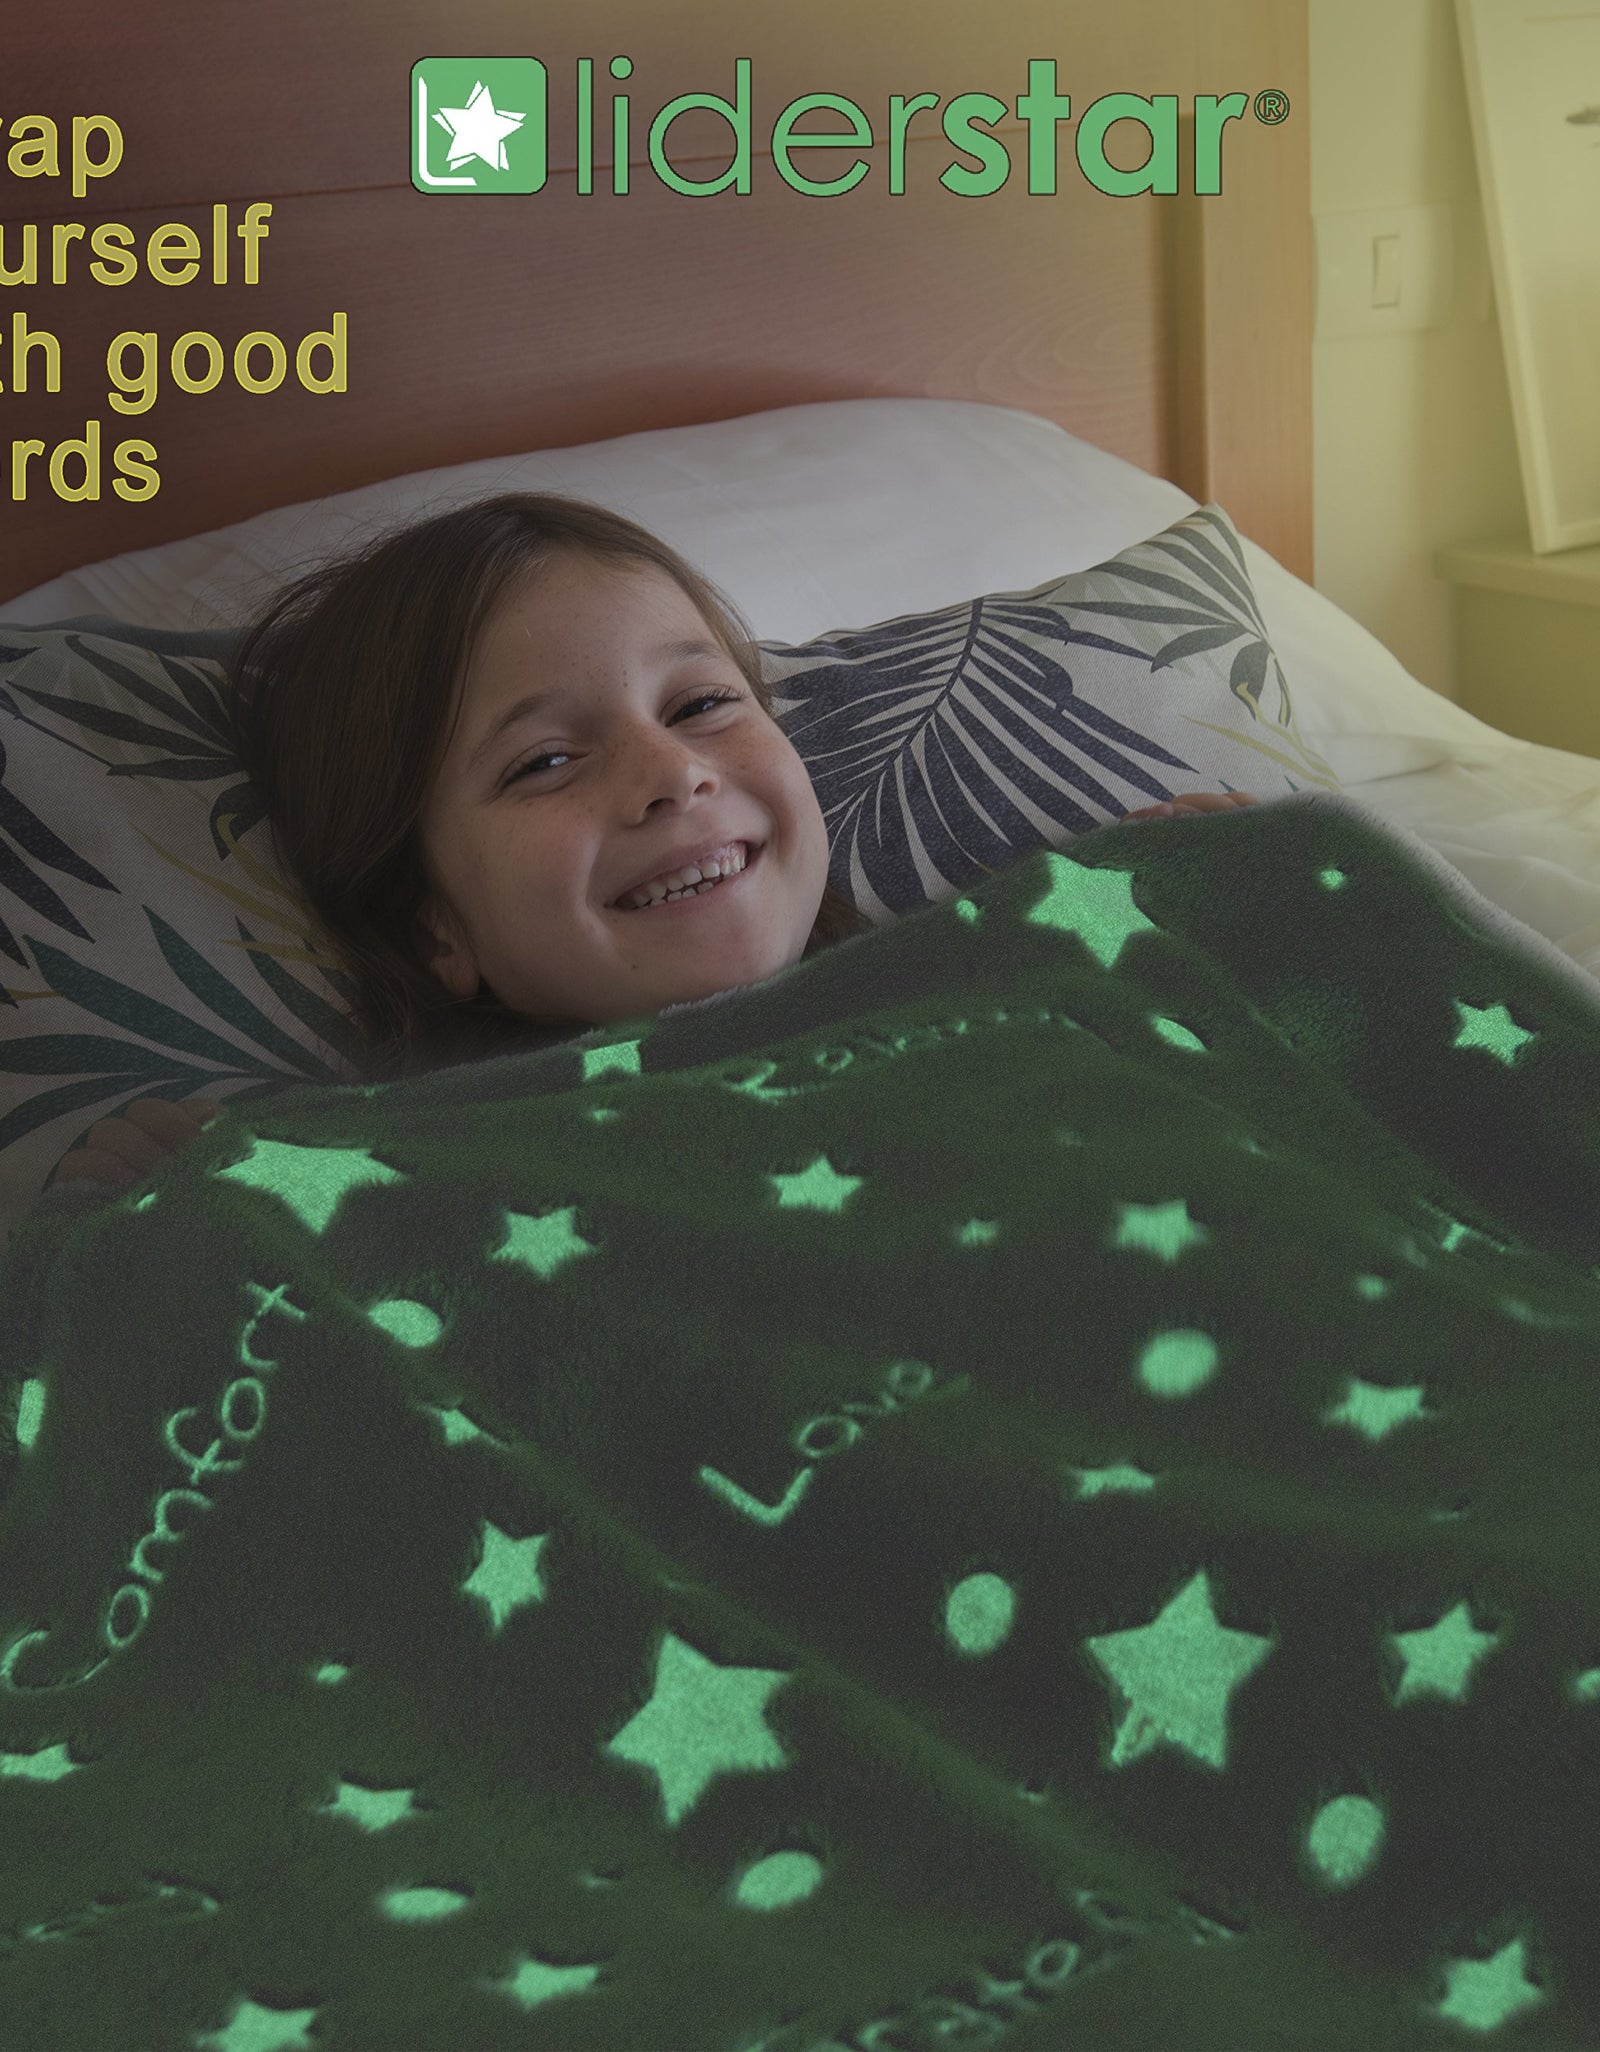 liderstar Glow in The Dark Throw Blanket,Super Soft Fuzzy Fluffy Plush Fleece,Decorated with Stars and Words of Healing, Christmas, Birthday Gift for Girls Boys Kids Teens Toddler, Gray,50"x 60"